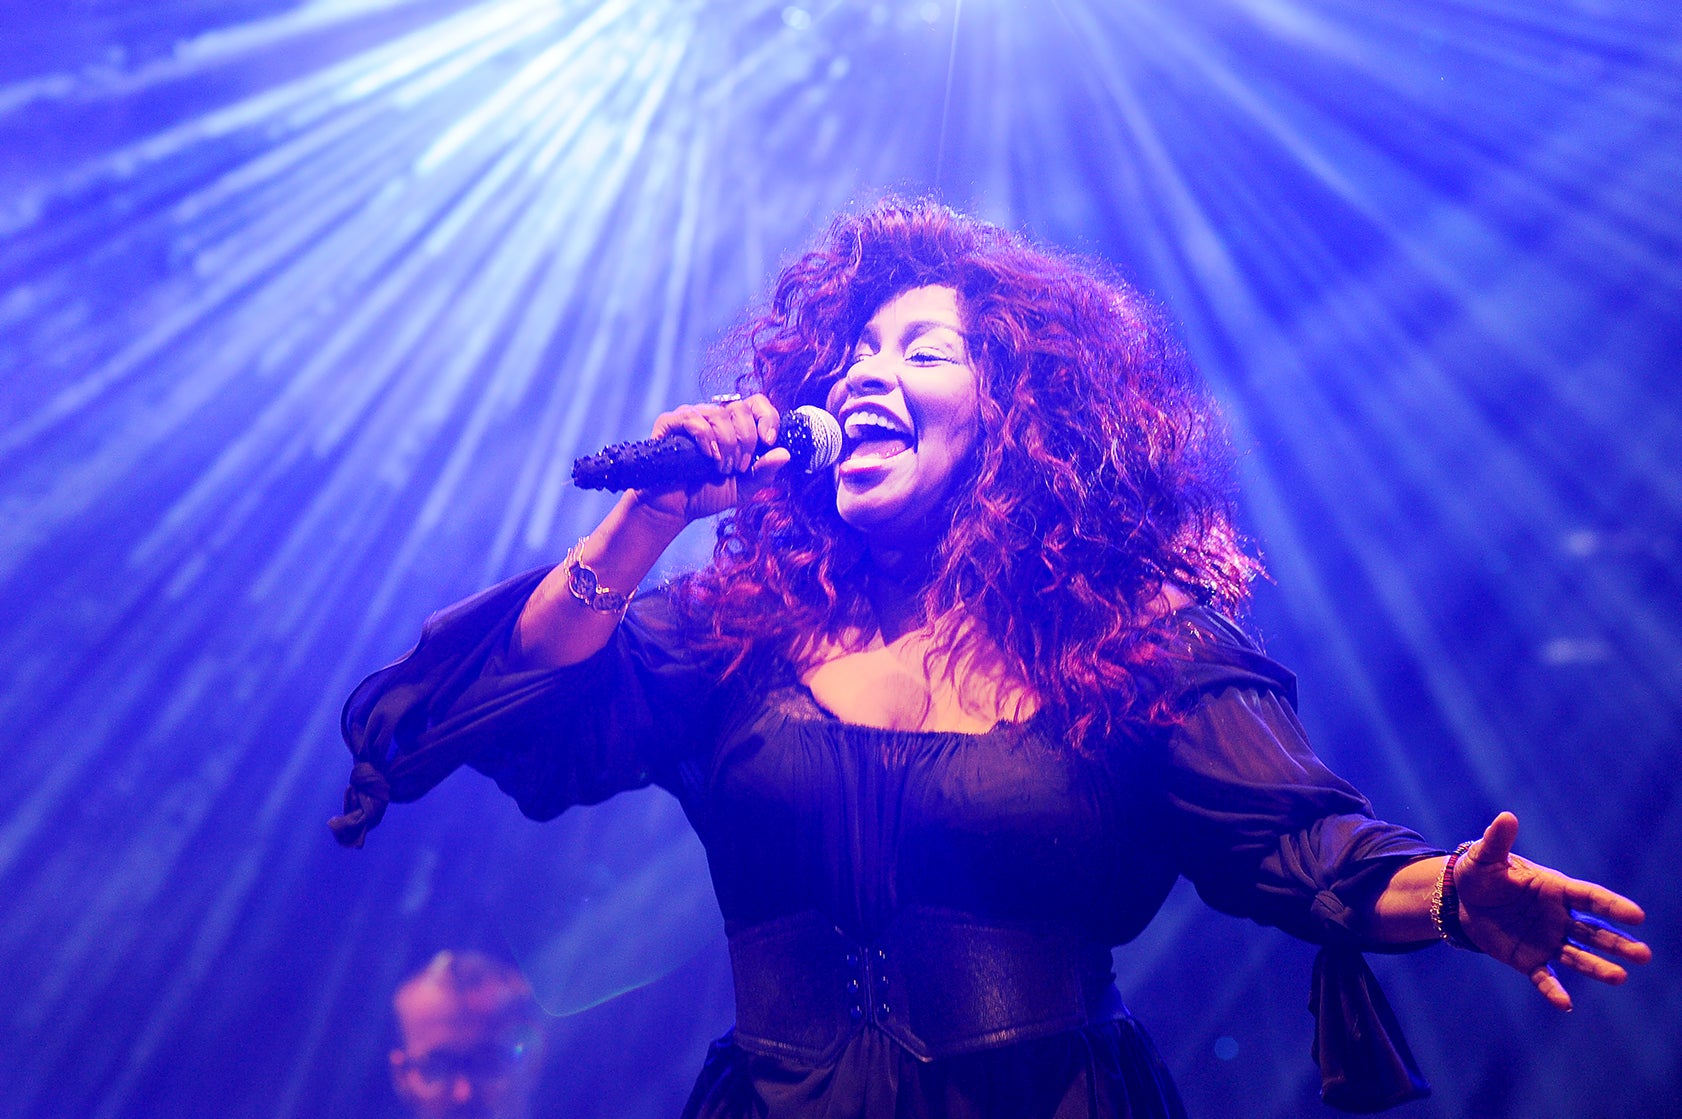 Chaka Khan Launches Lip-Syncing Fan Video Challenge for Song 'I Love Myself'